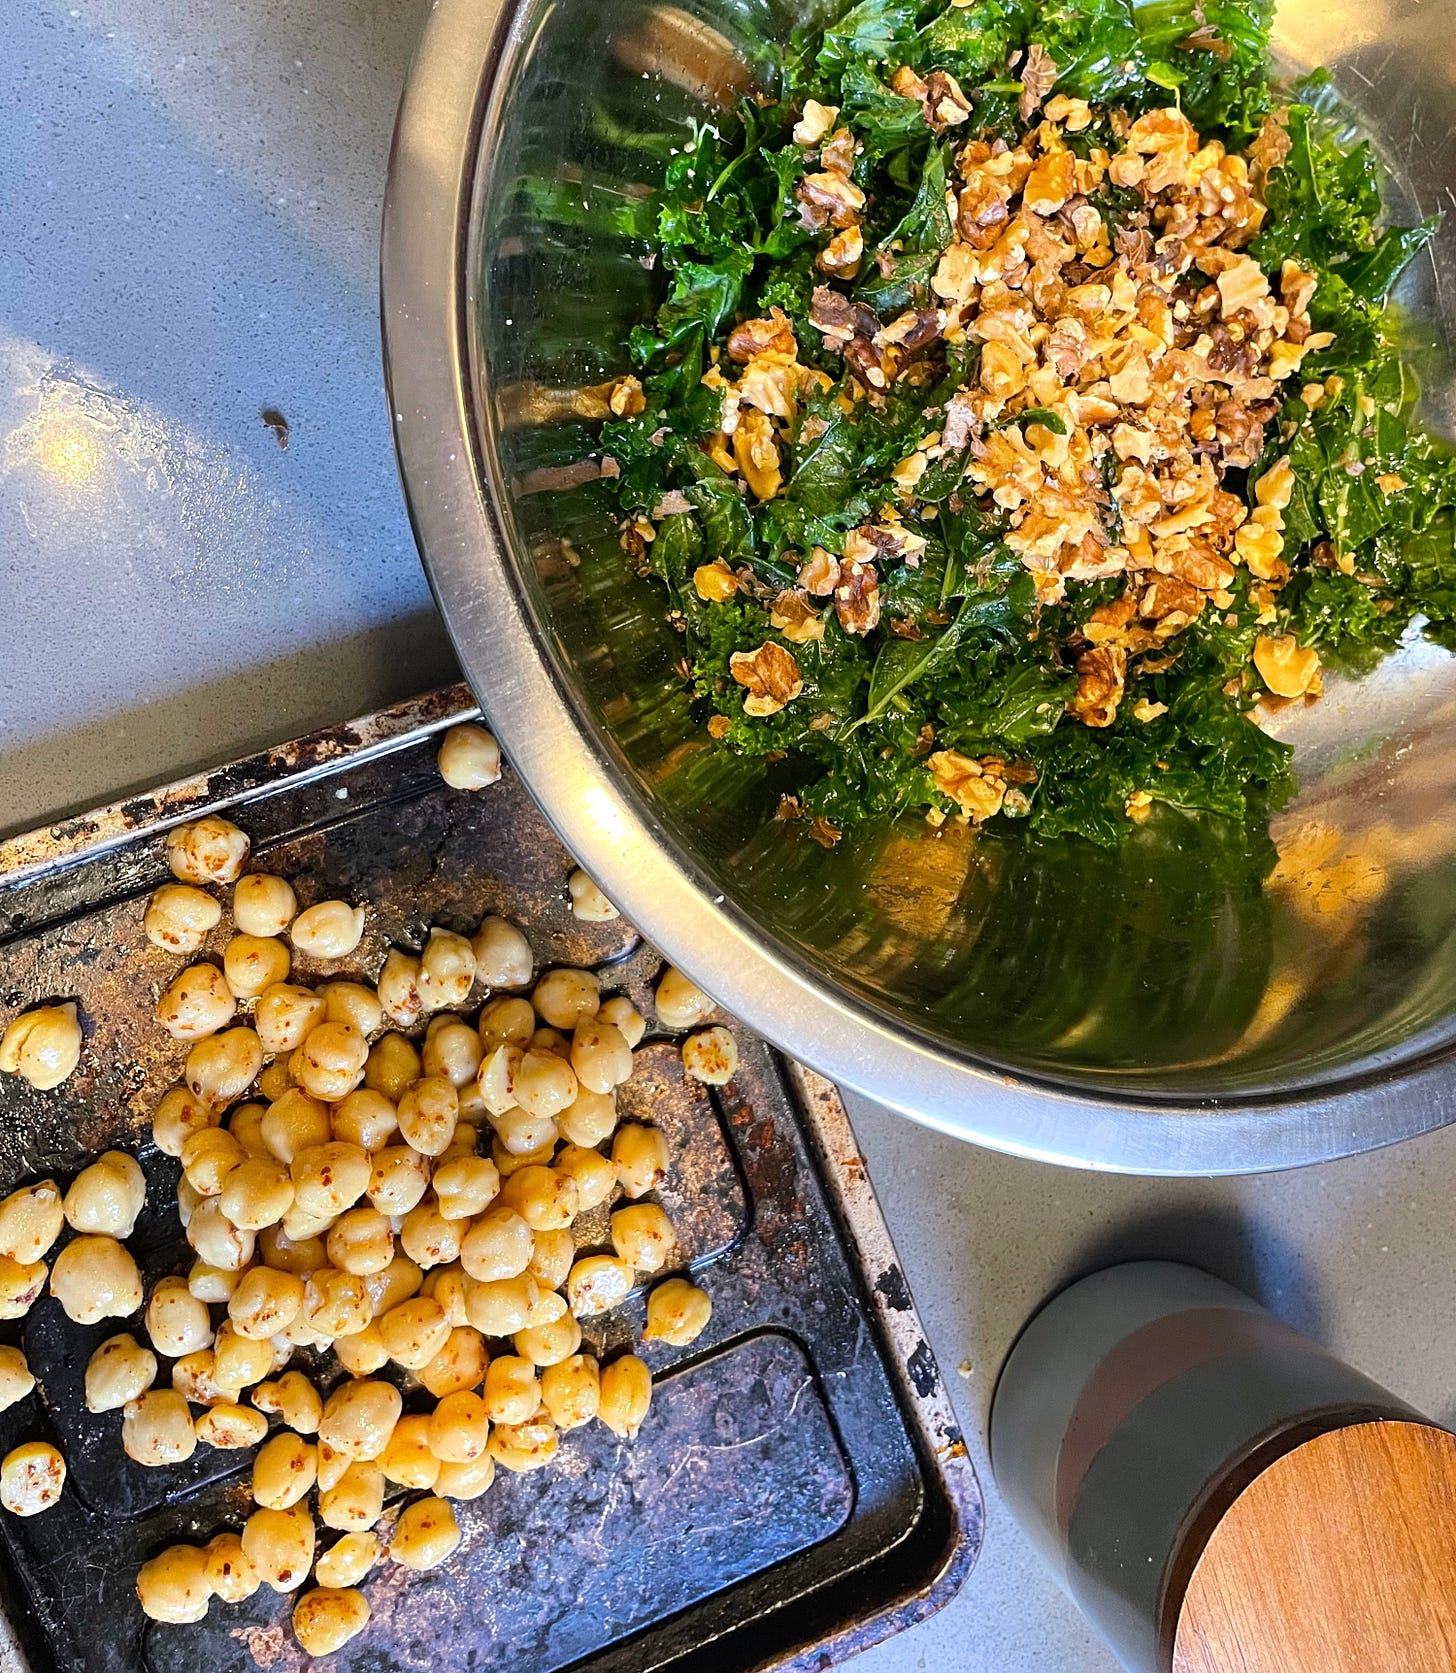 bowl of massaged kale and toasted walnuts next to seasoned chickpeas on tray